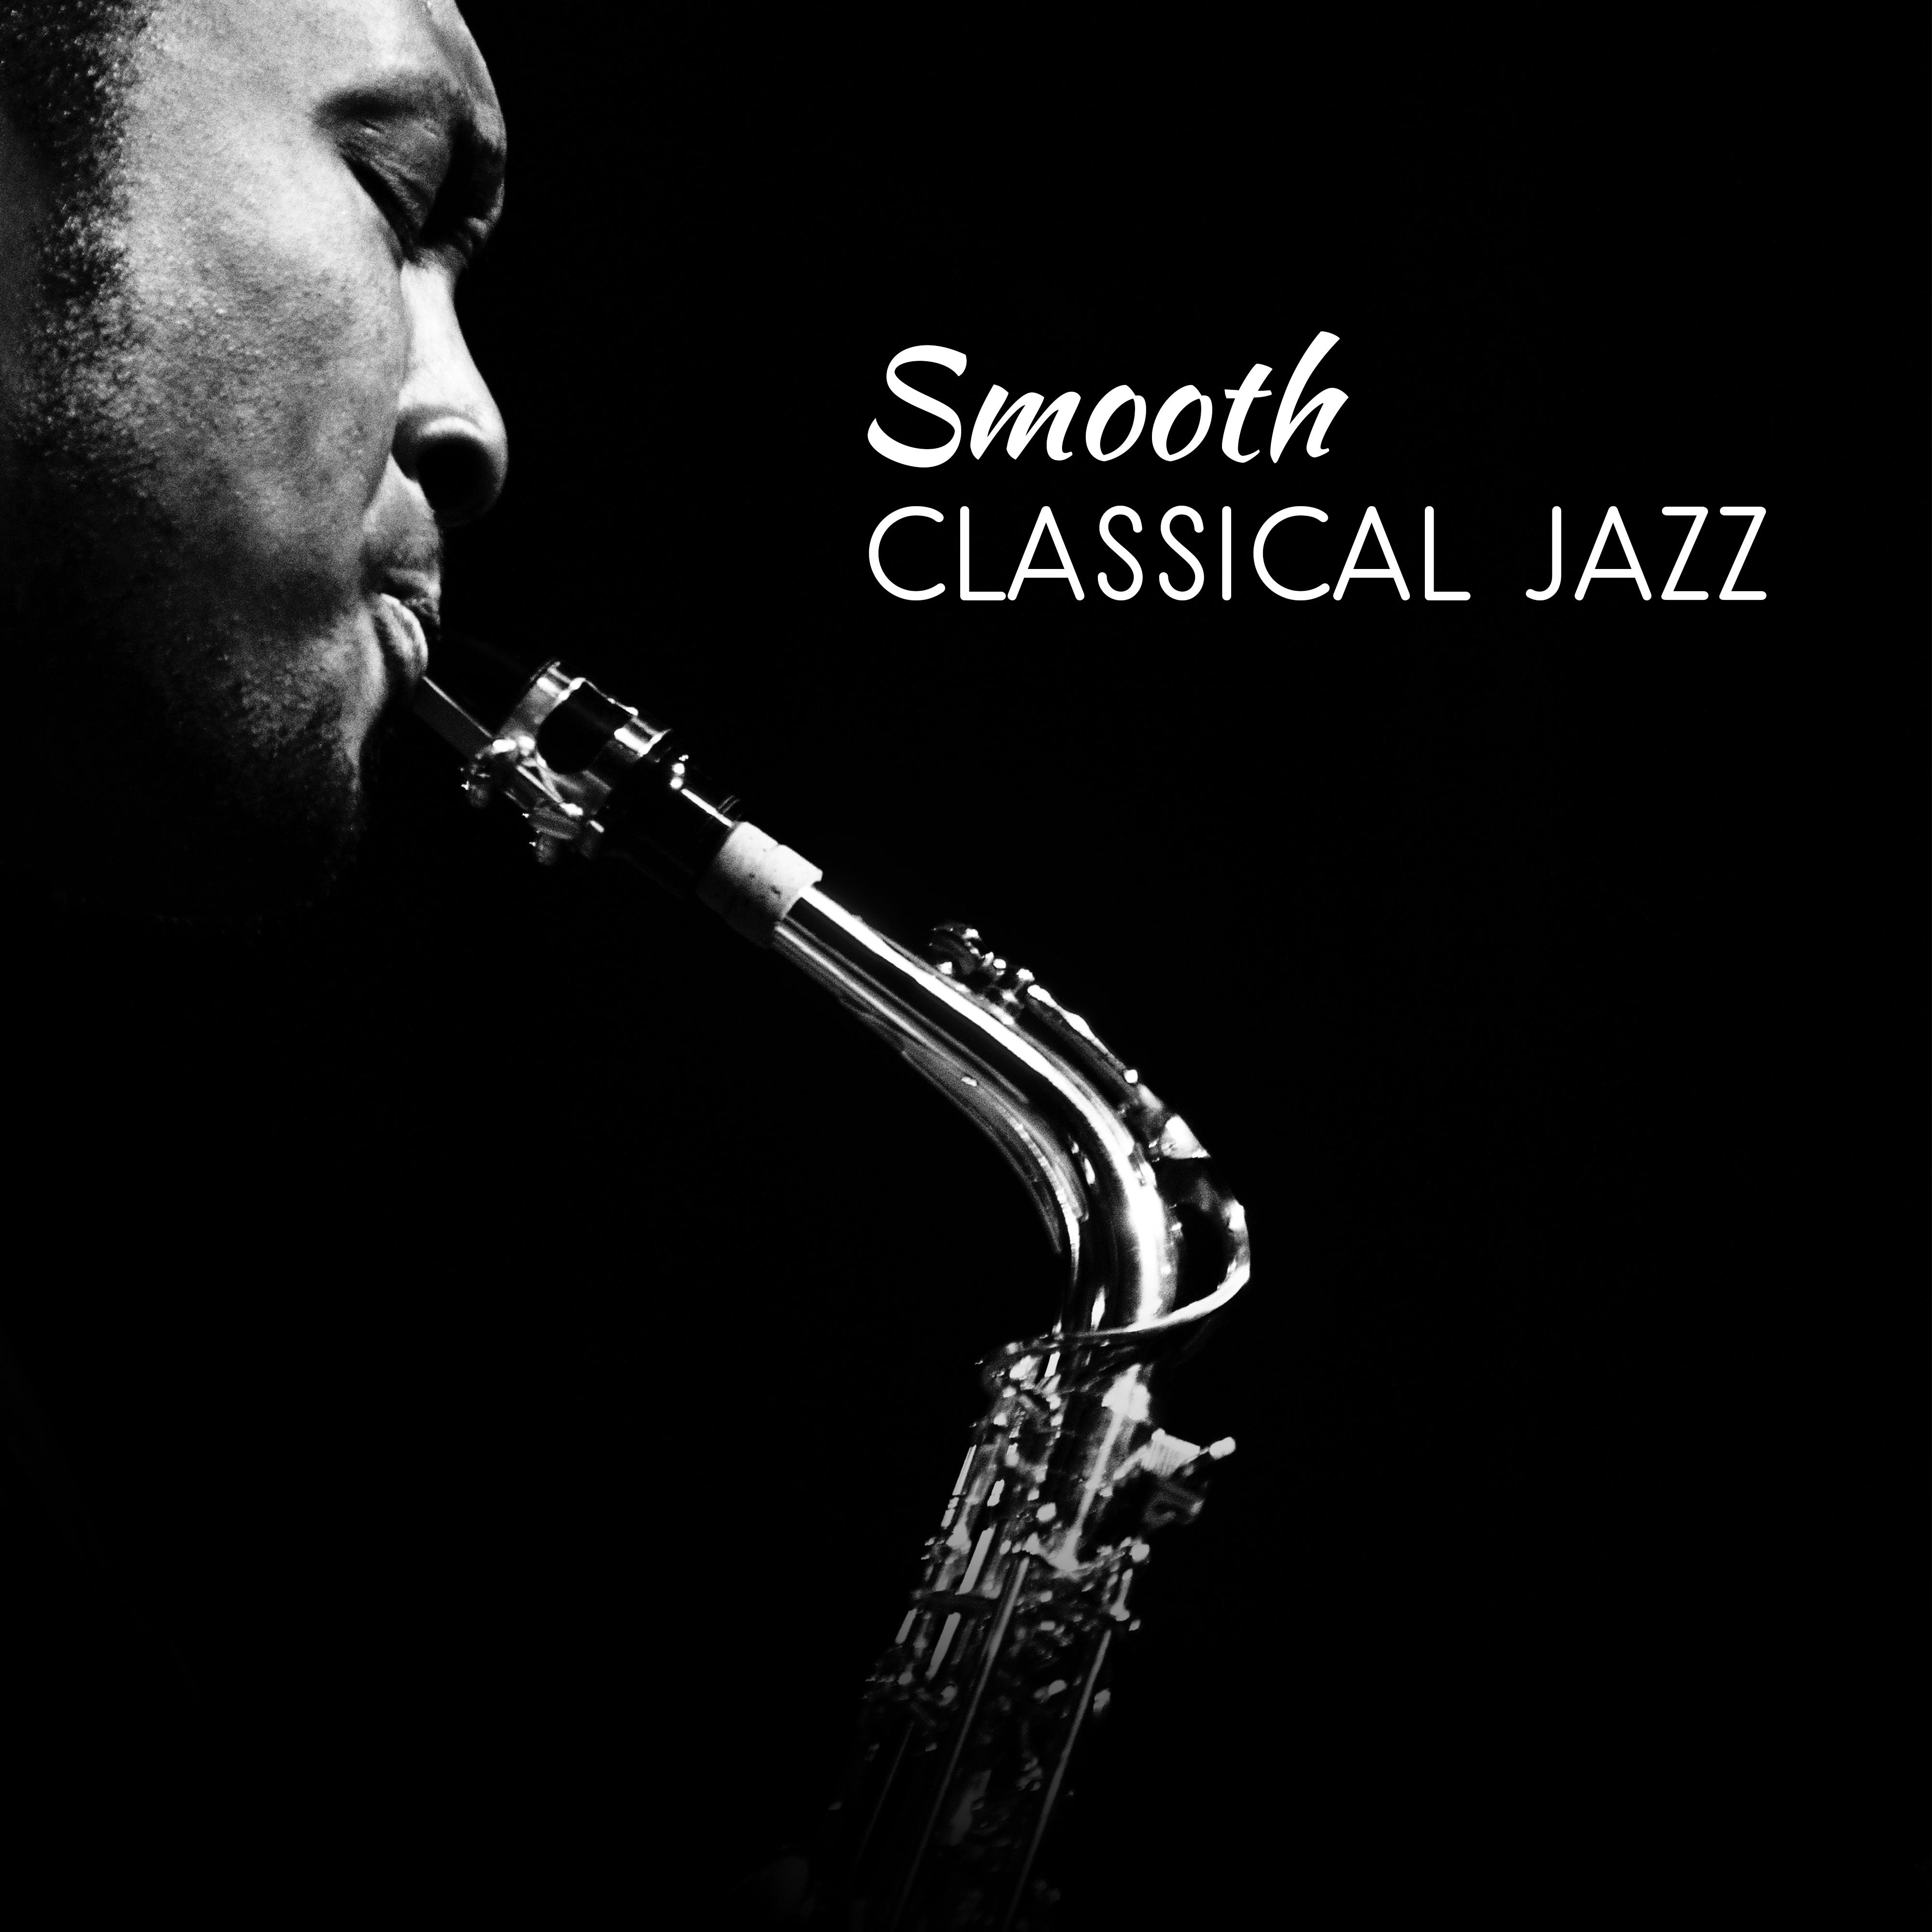 Smooth Classical Jazz